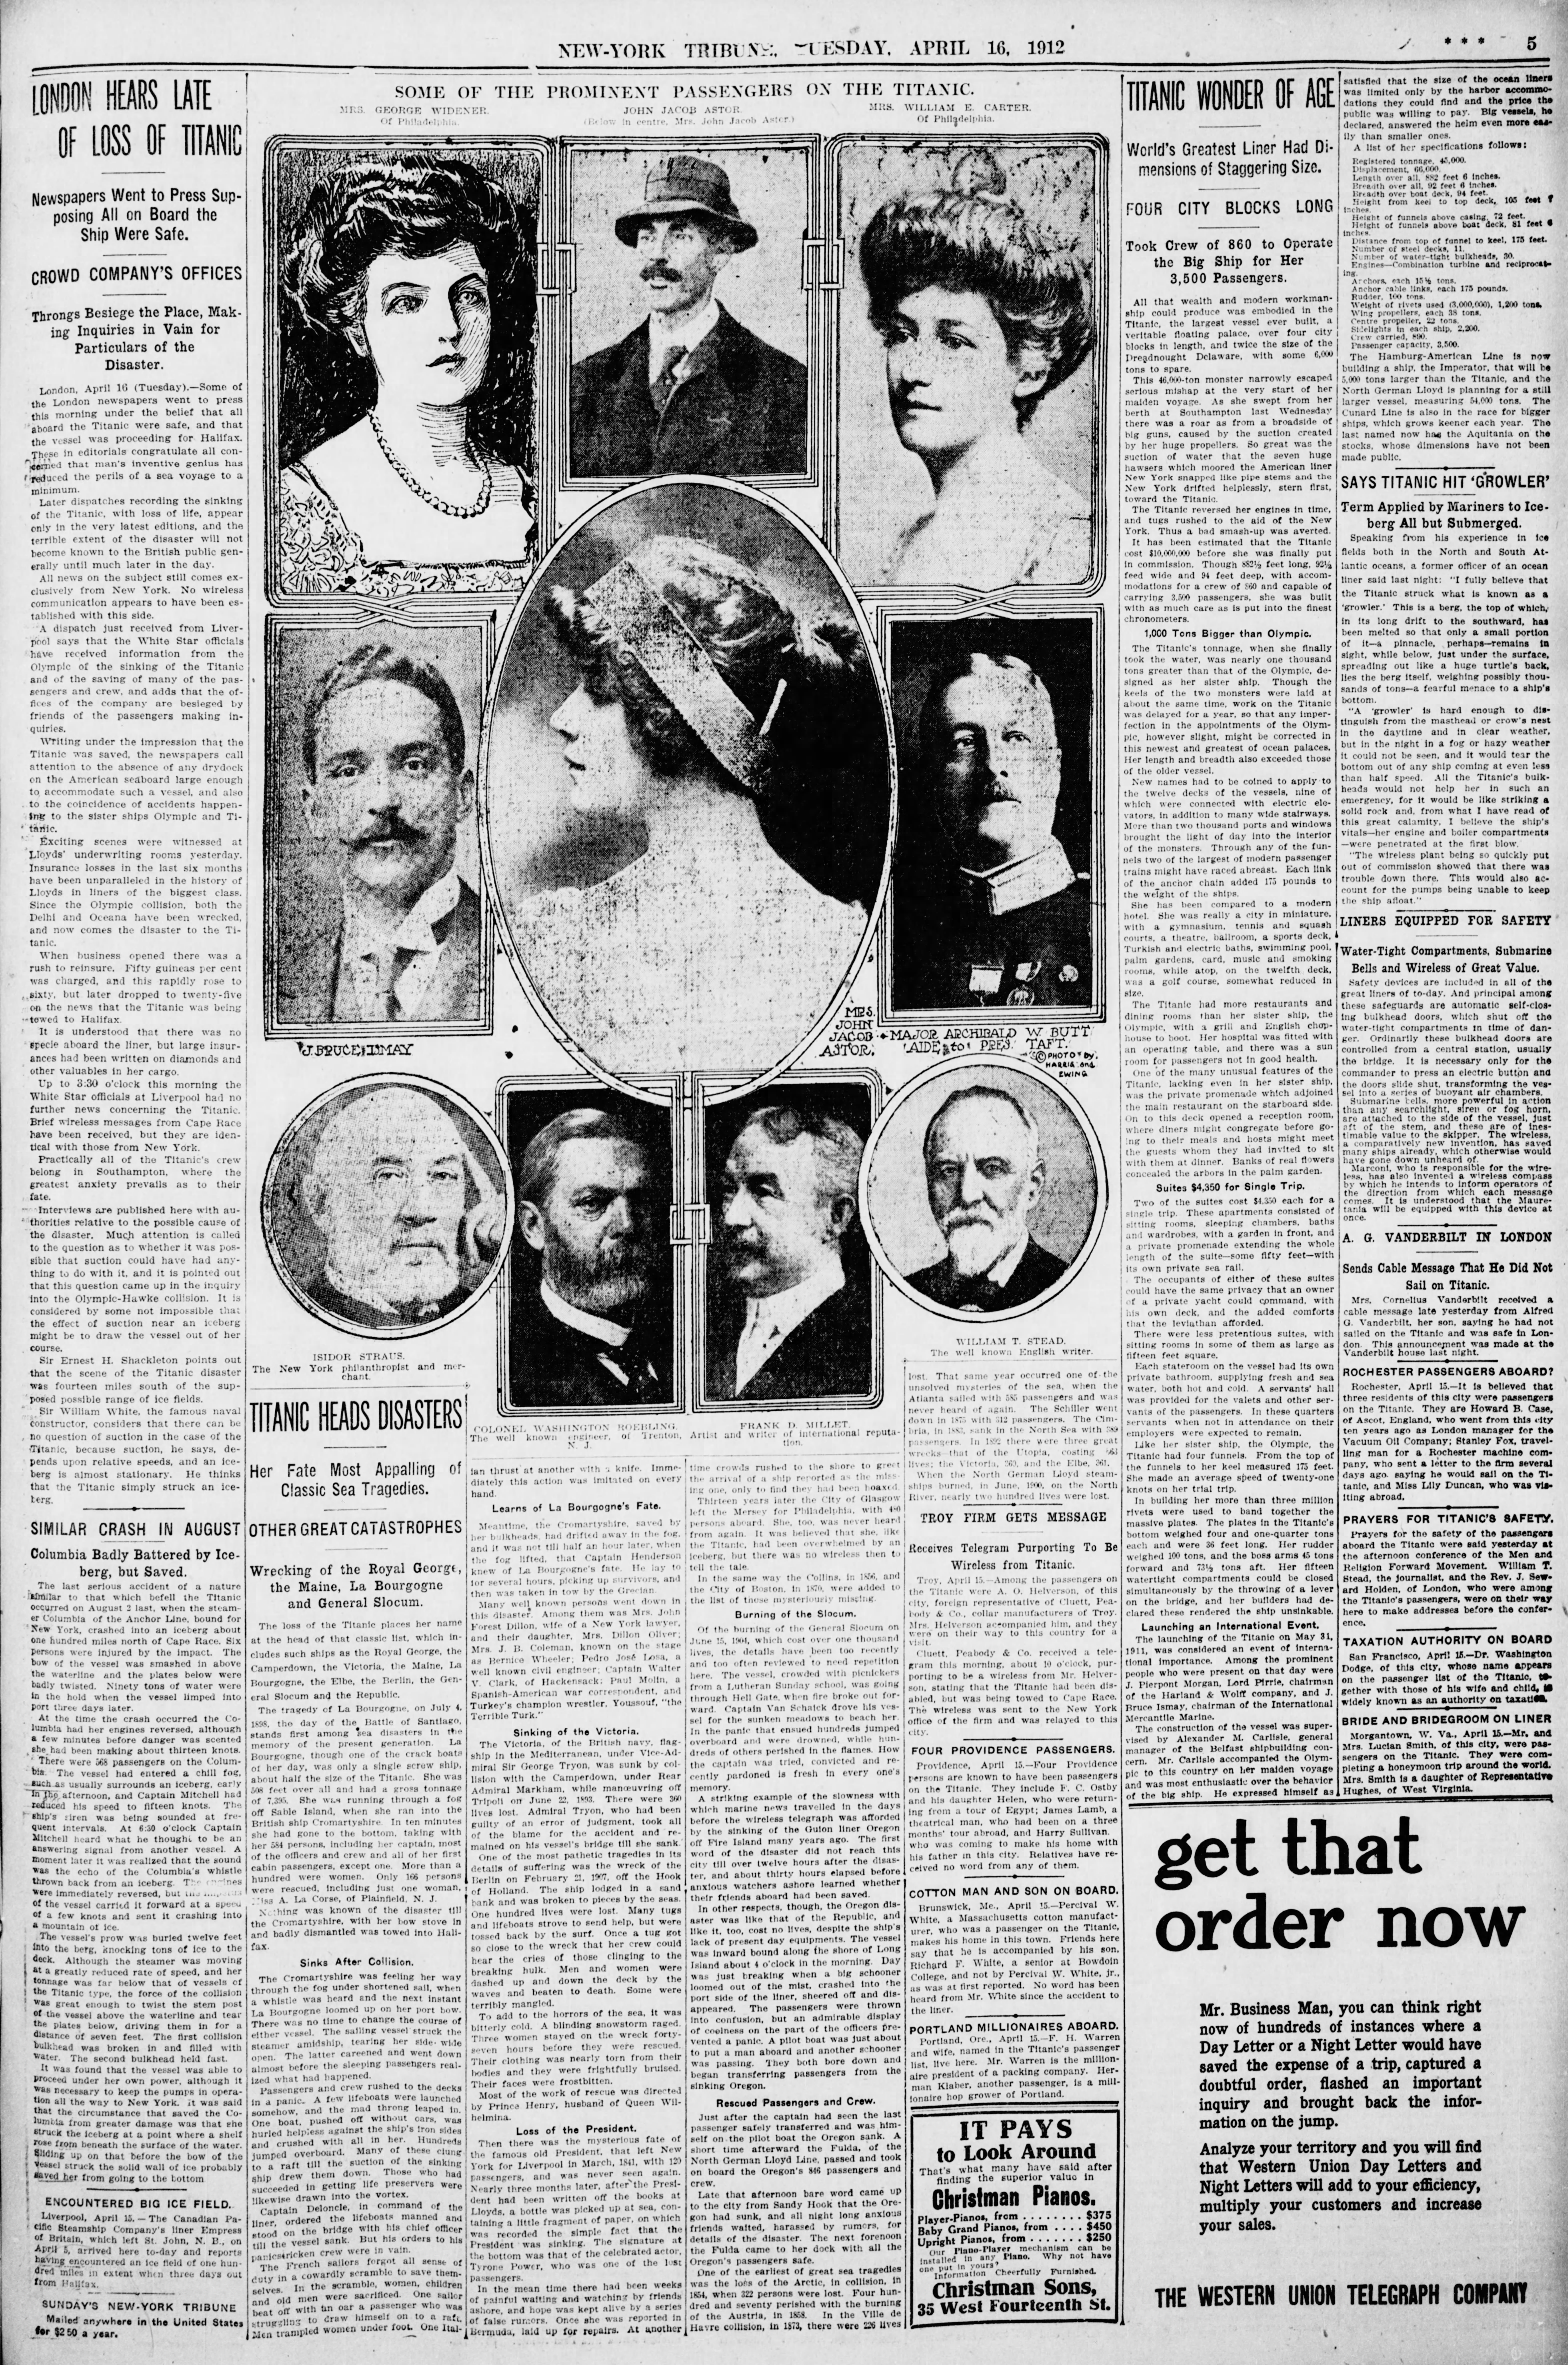 Editor. (Apr. 16, 1912) . 1,340 Perish As Titanic Sinks; Only 886, Mostly Women and Children, Rescued, pp. 1,5. New-York Tribune. (16 MB).